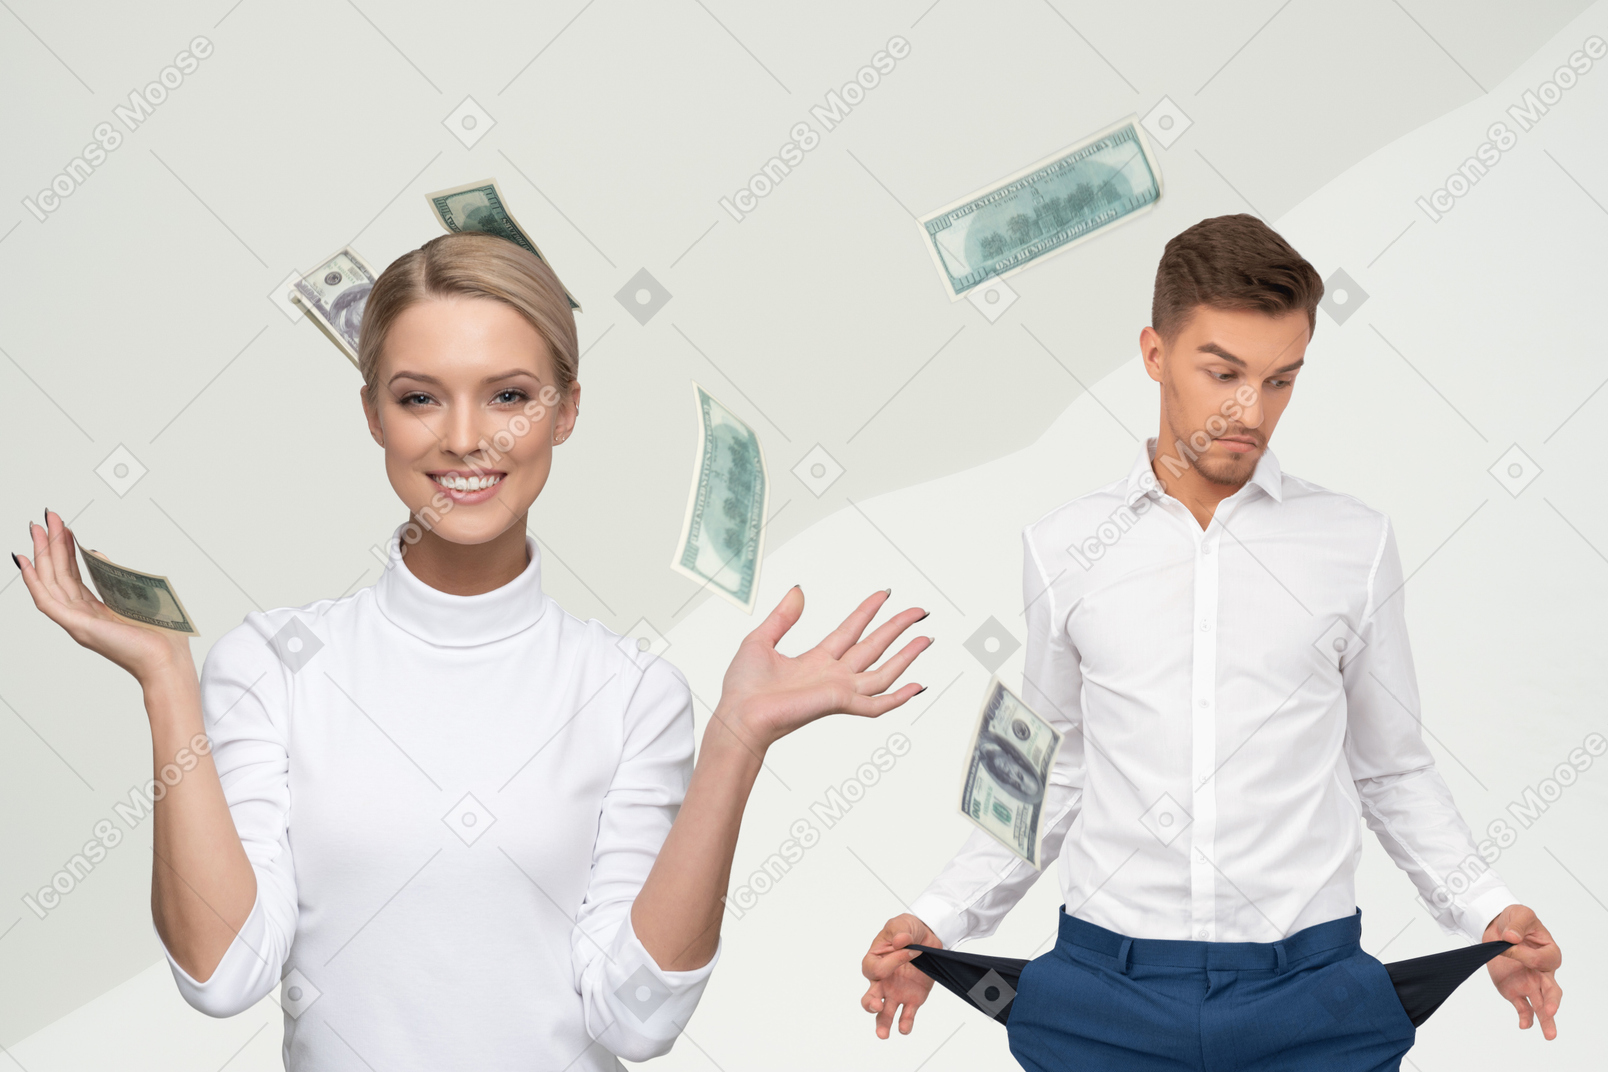 Smiling woman throwing money bills and man showing empty pockets